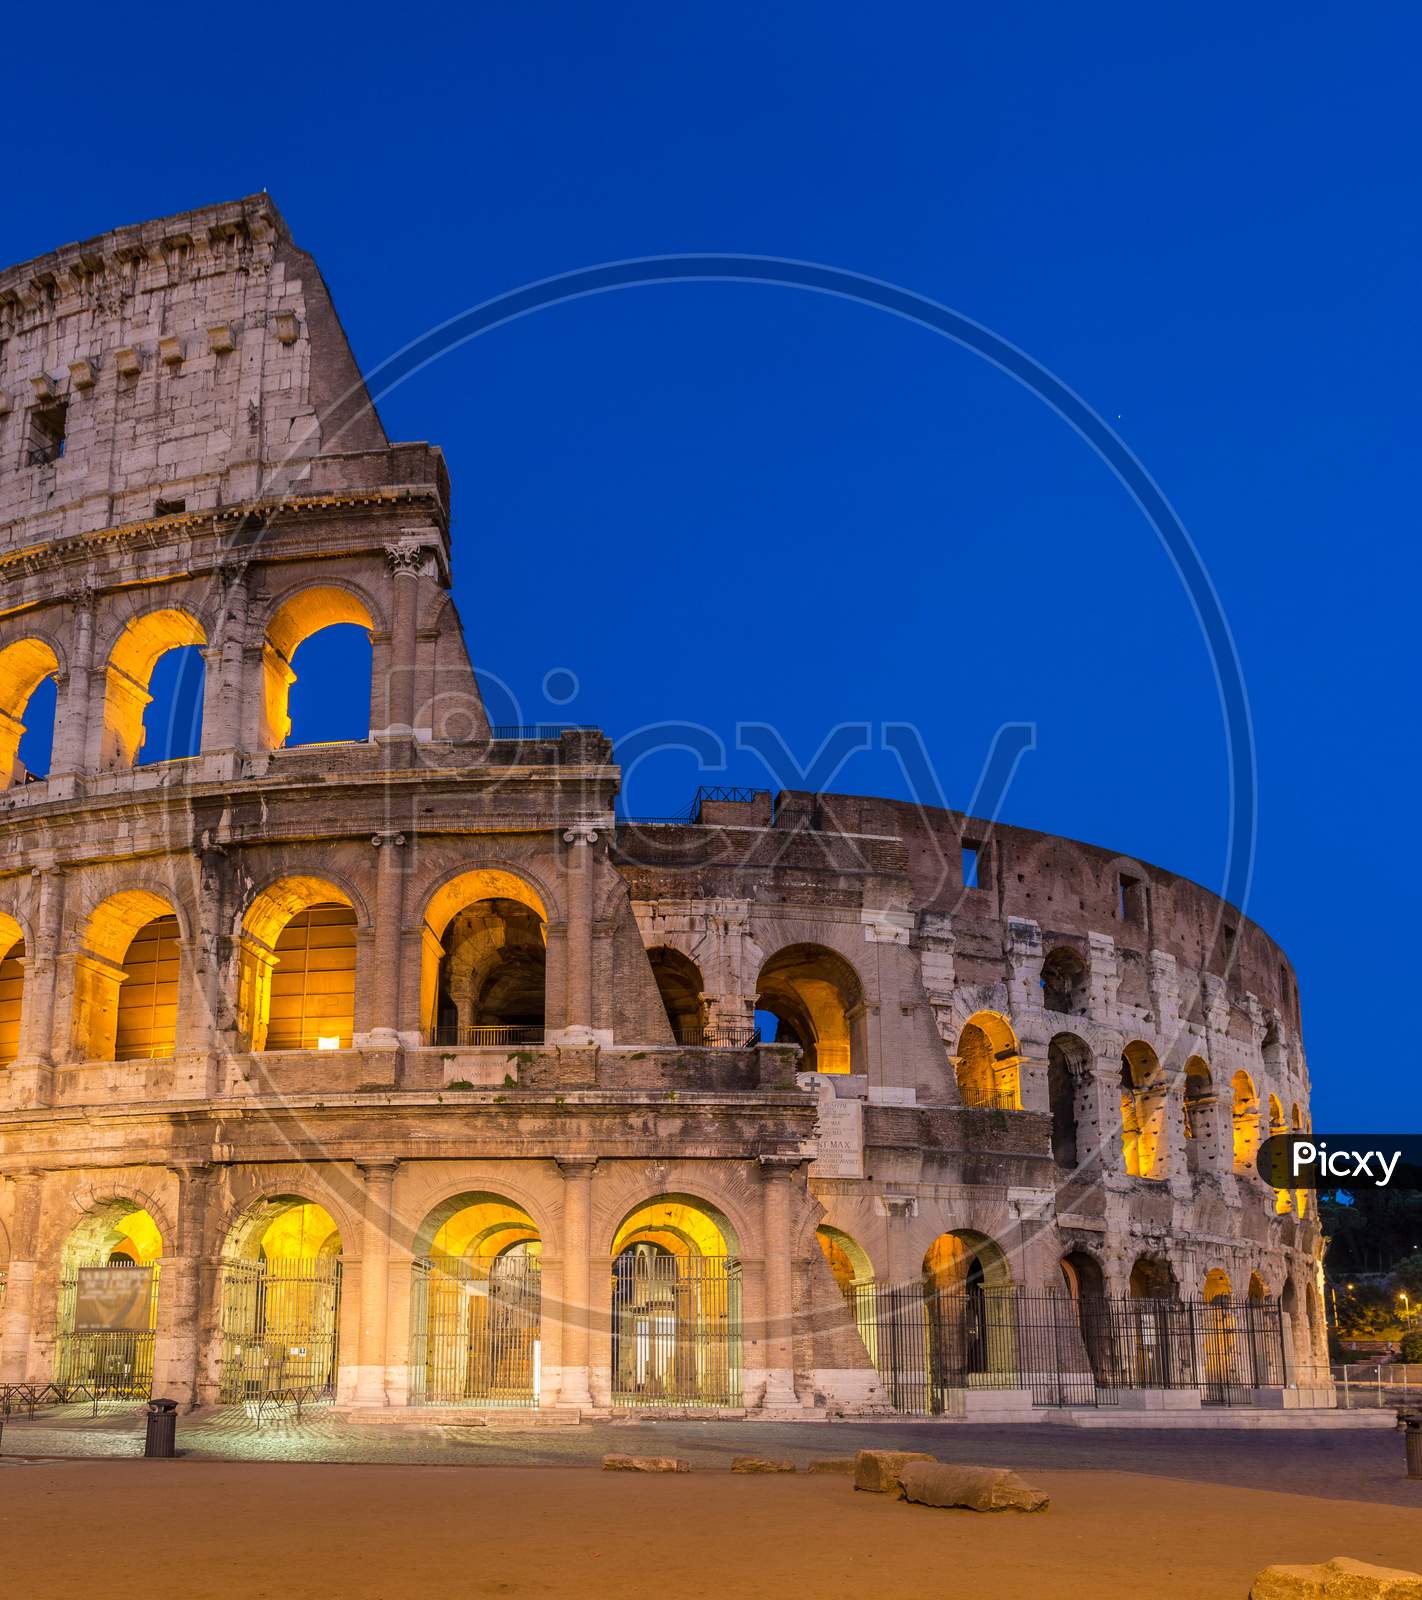 Evening View Of Colosseo In Rome, Italy